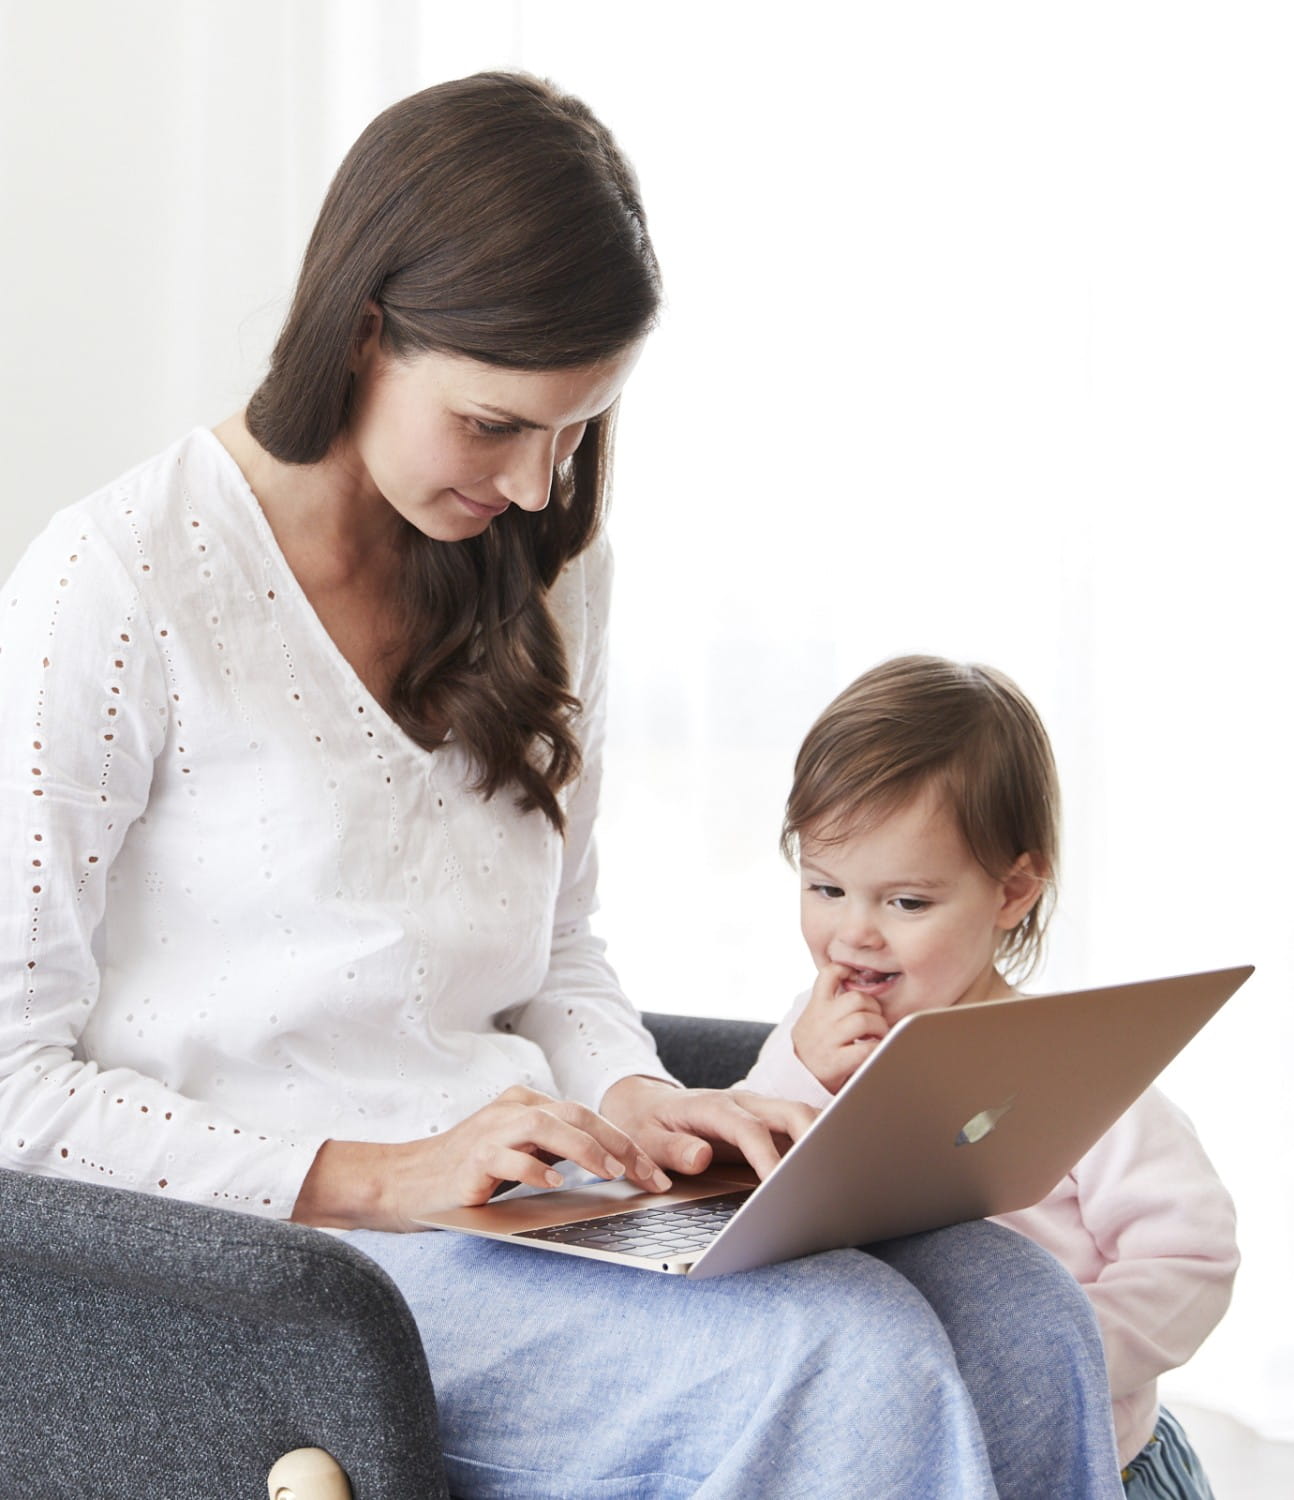 Woman and child on laptop computer